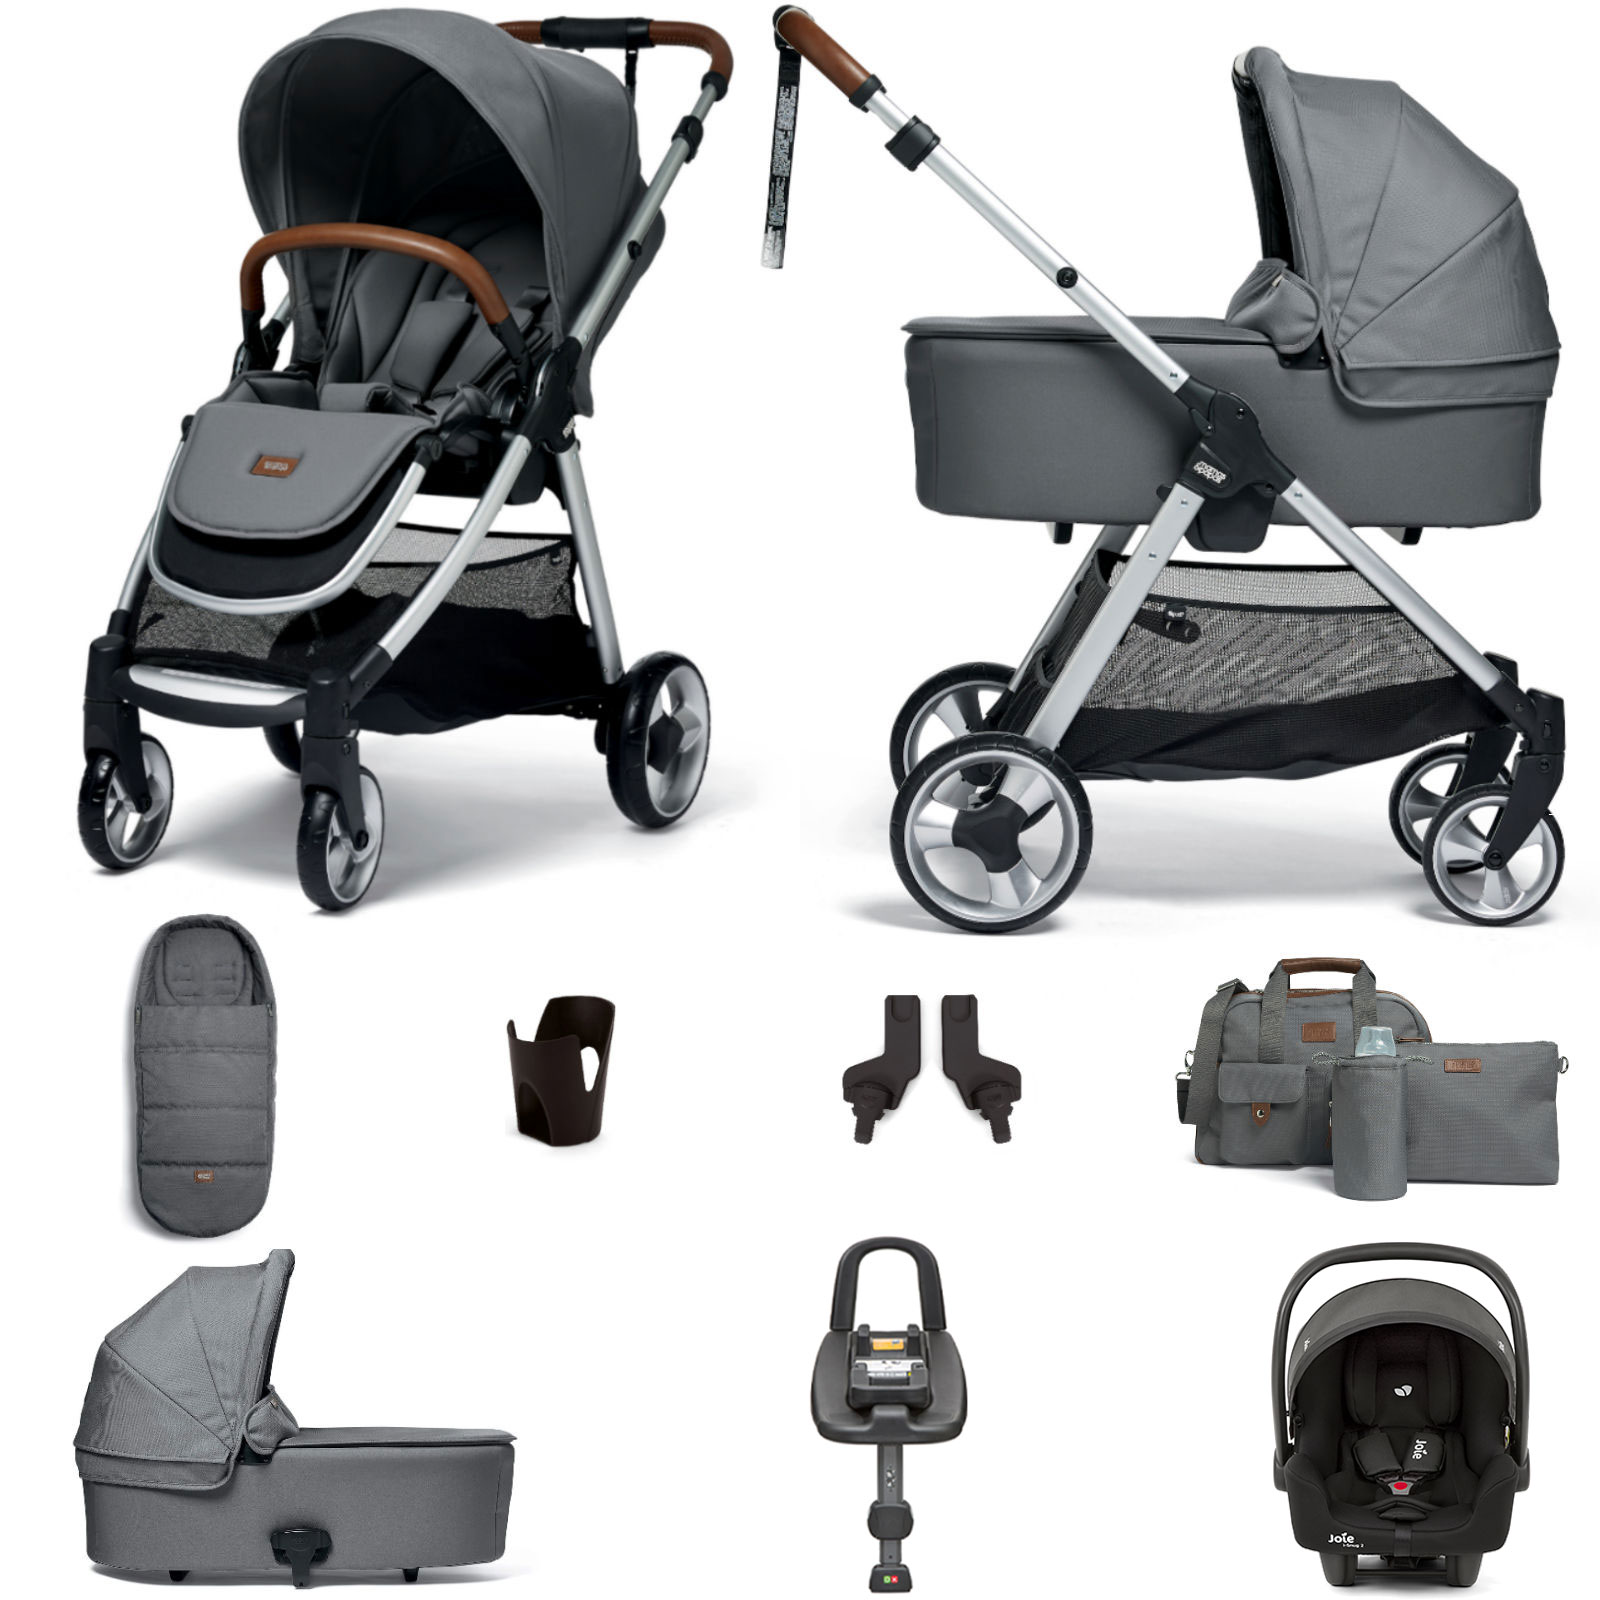 Mamas & Papas Flip XT2 8pc Essentials (i-Size 2 Car Seat) Travel System with Carrycot & ISOFIX i-Base Advance - Fossil Grey